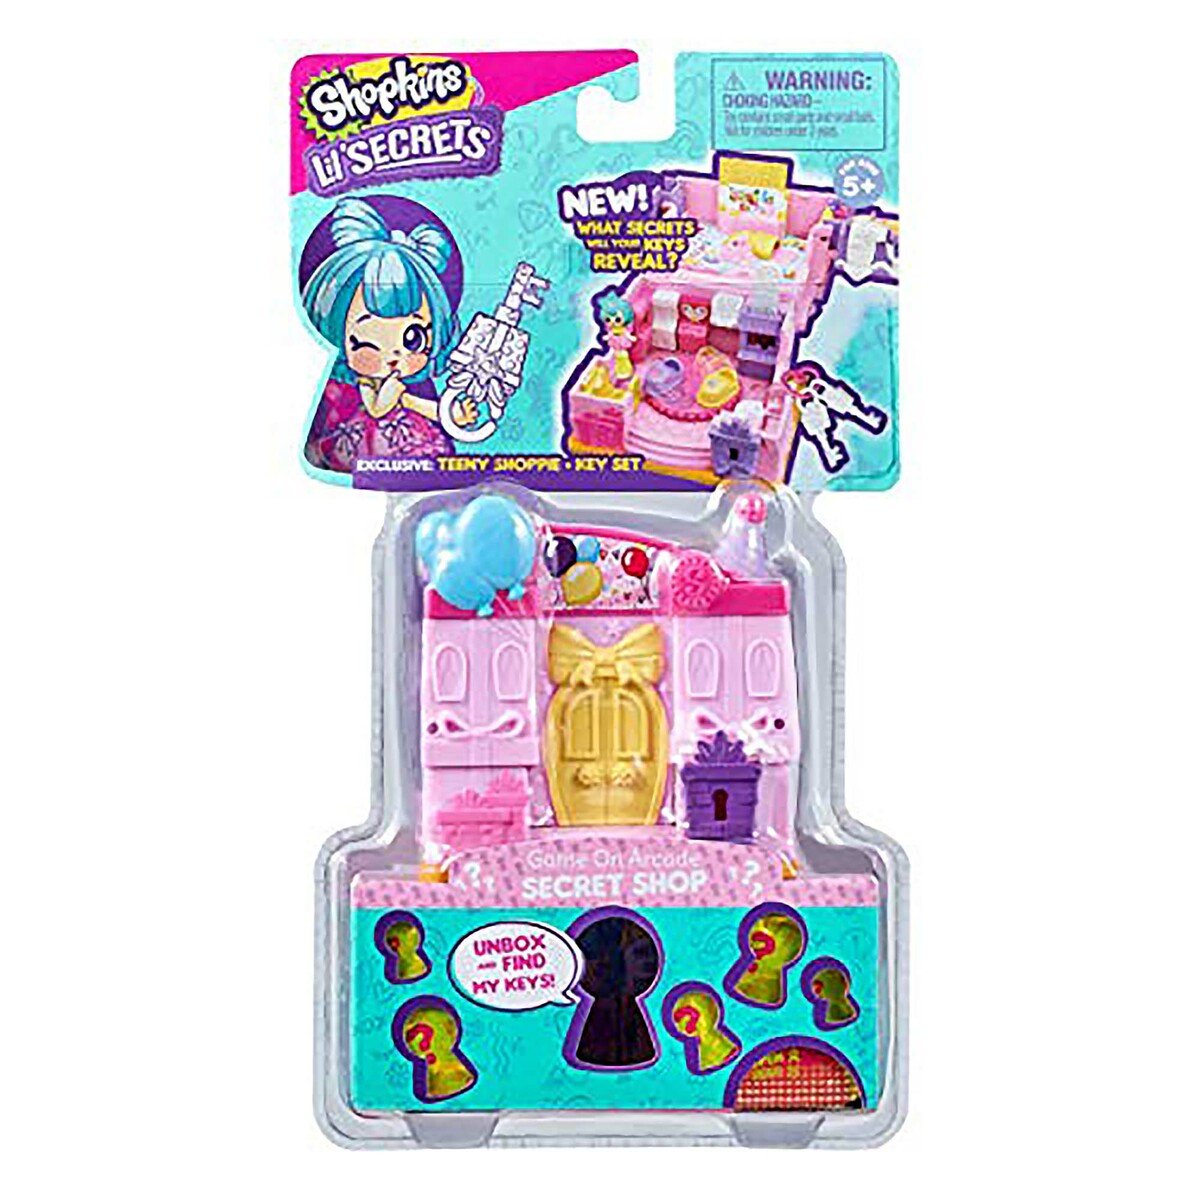 Shopkins Party Game Arcade Playset 57479